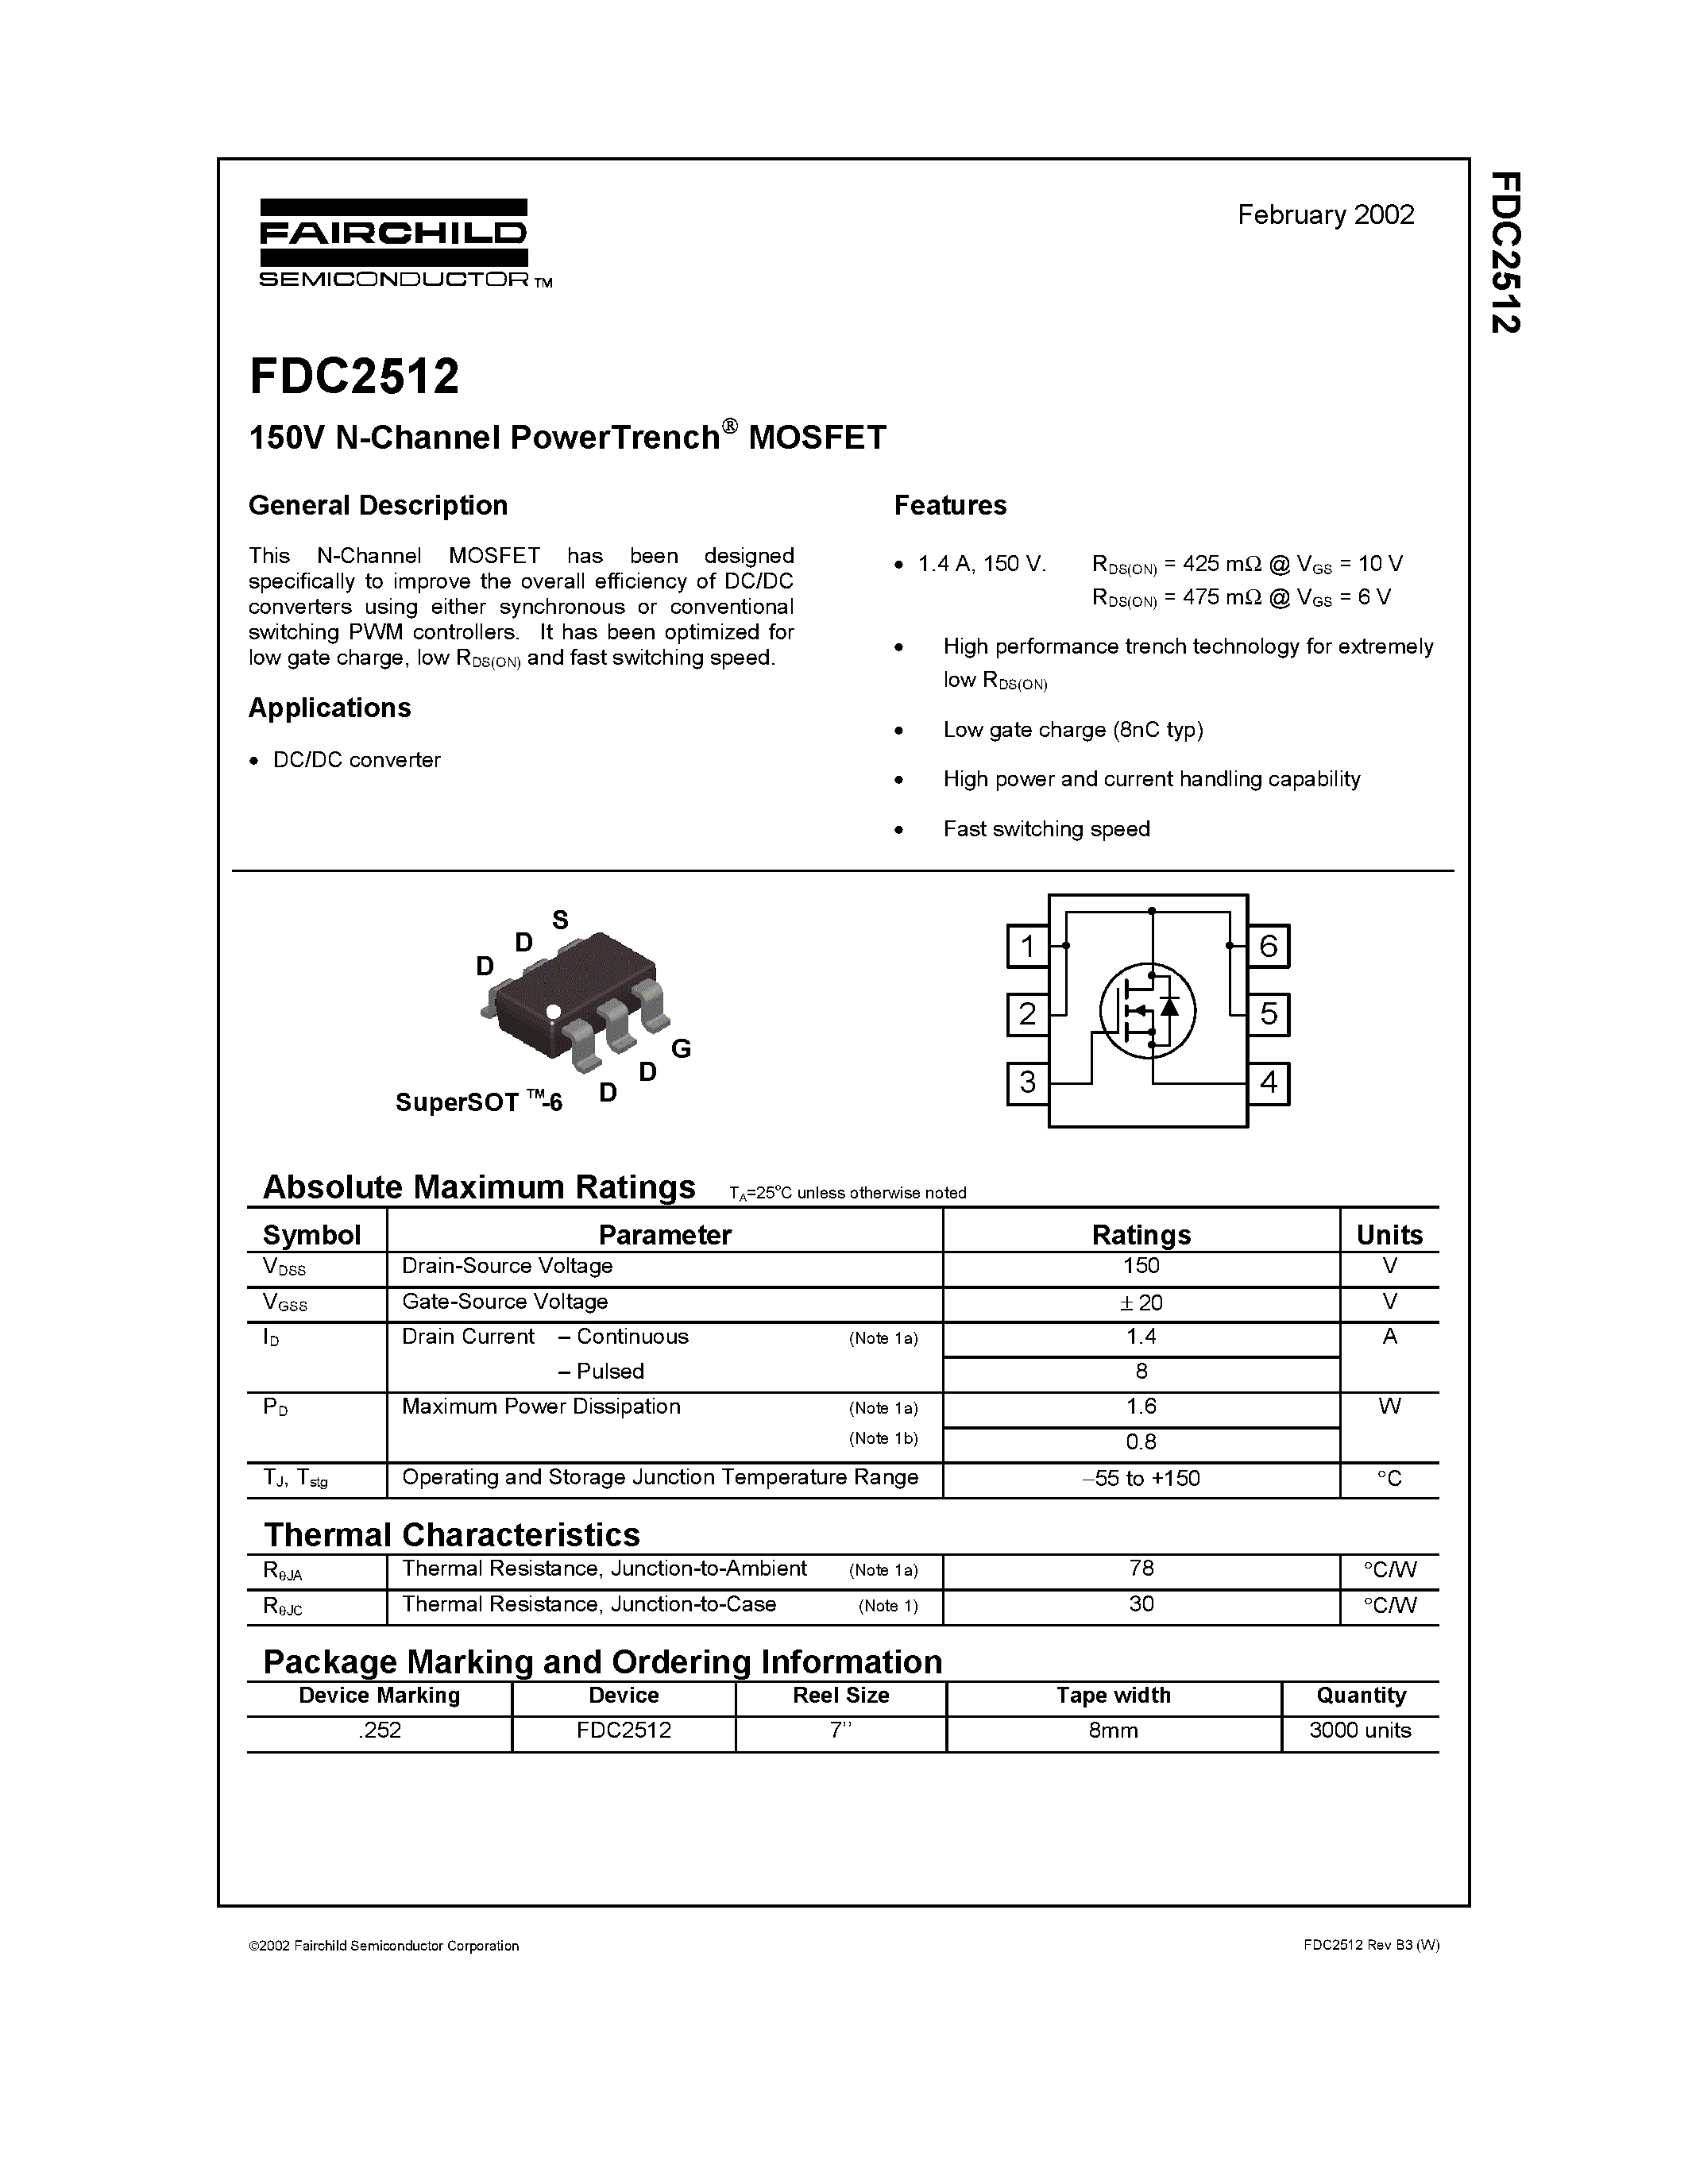 Datasheet FDC2512 - 150V N-Channel PowerTrench MOSFET page 1